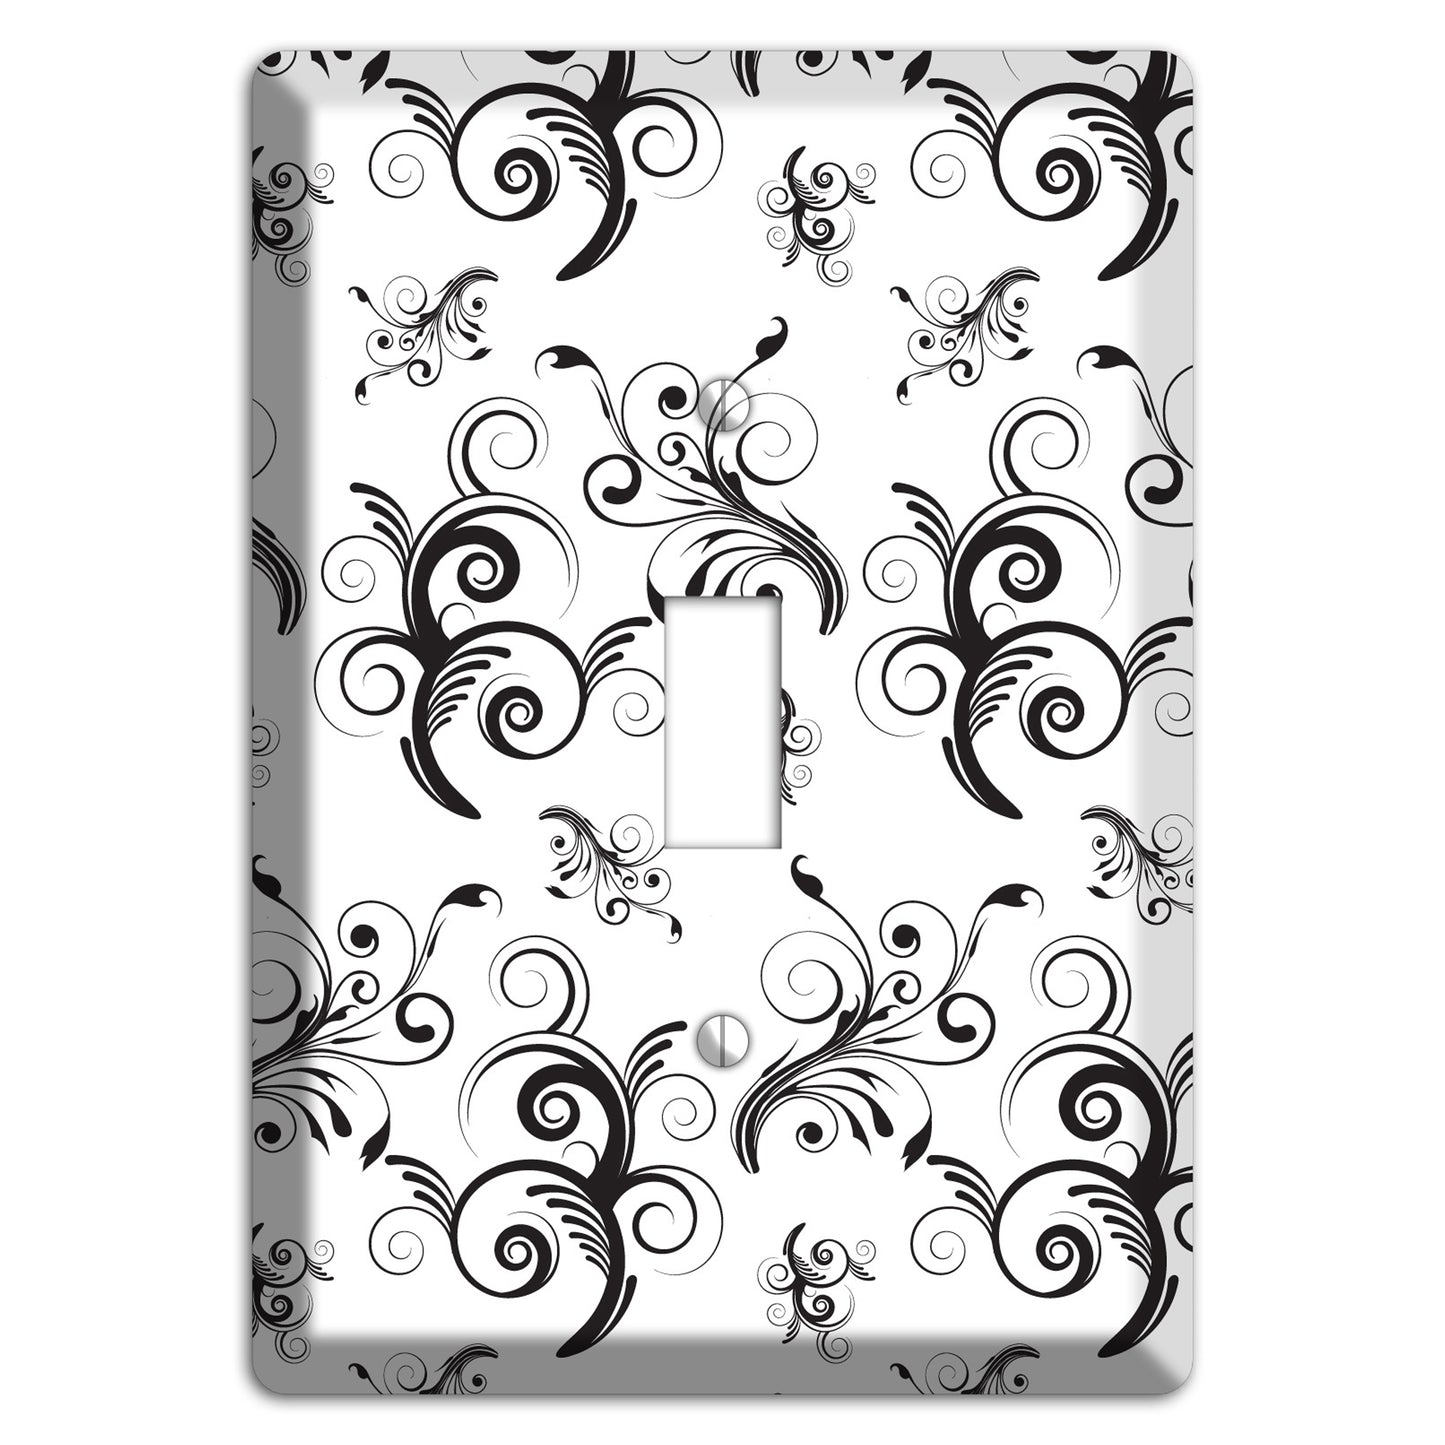 Scrolled Toile Cover Plates